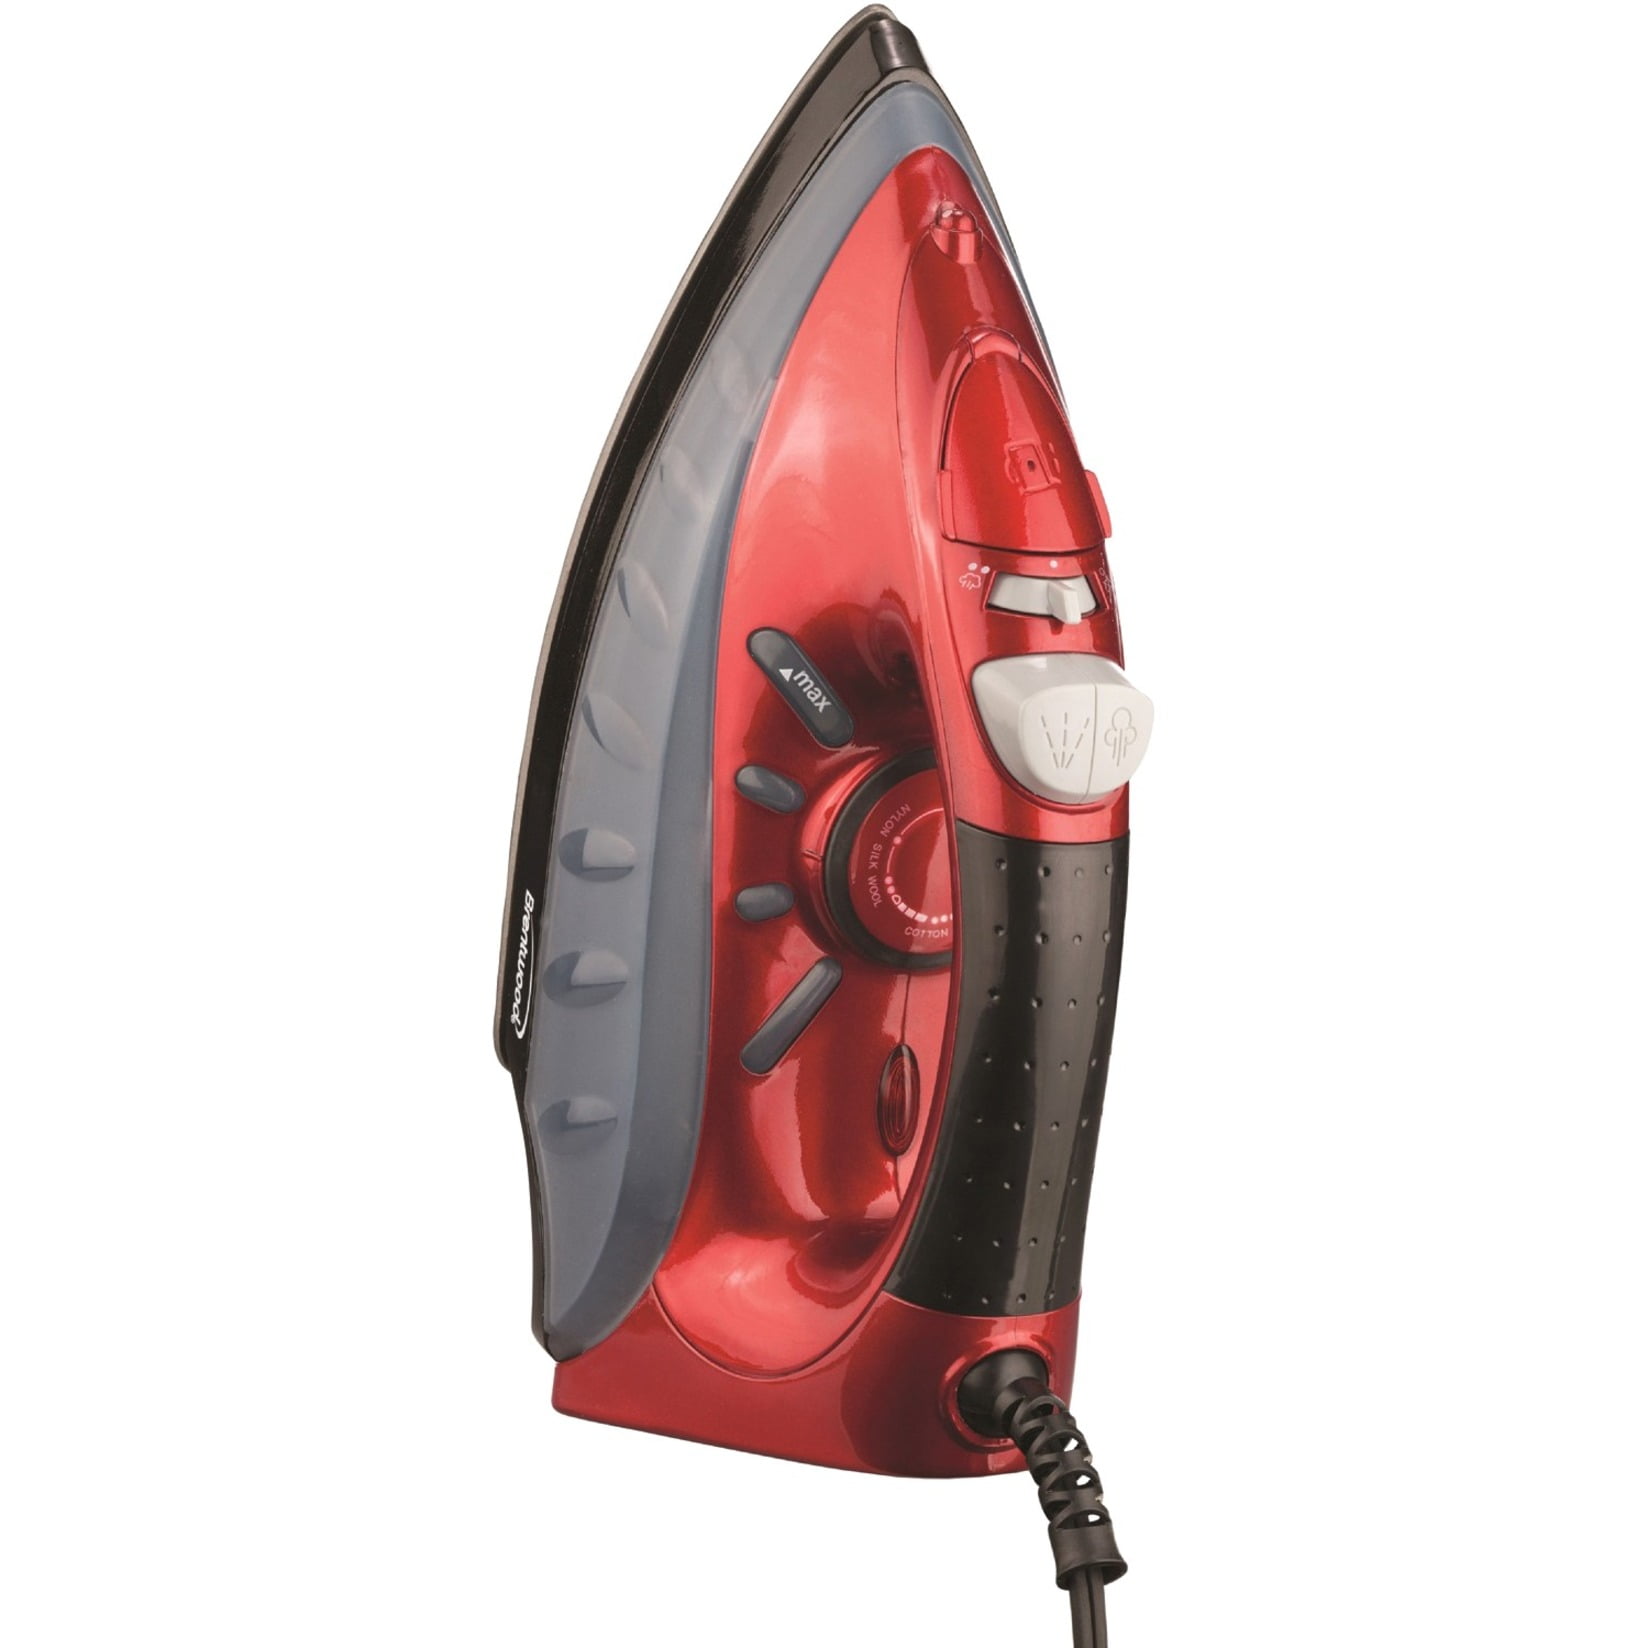 Non-Stick Steam/Dry Spray Iron 1200W Brentwood MPI-61 Red 